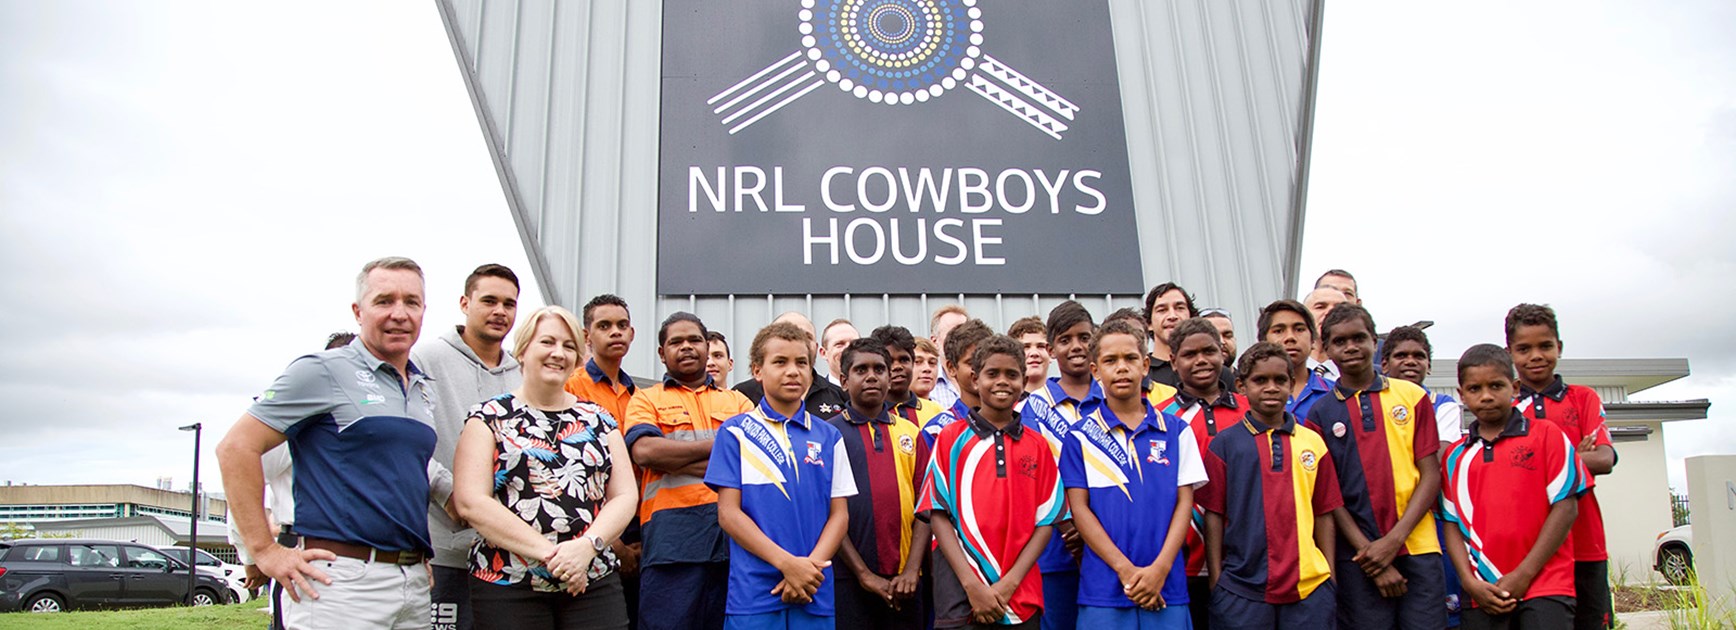 NRL Cowboys House will give students from remote communities an opportunity to fulfil their potential.